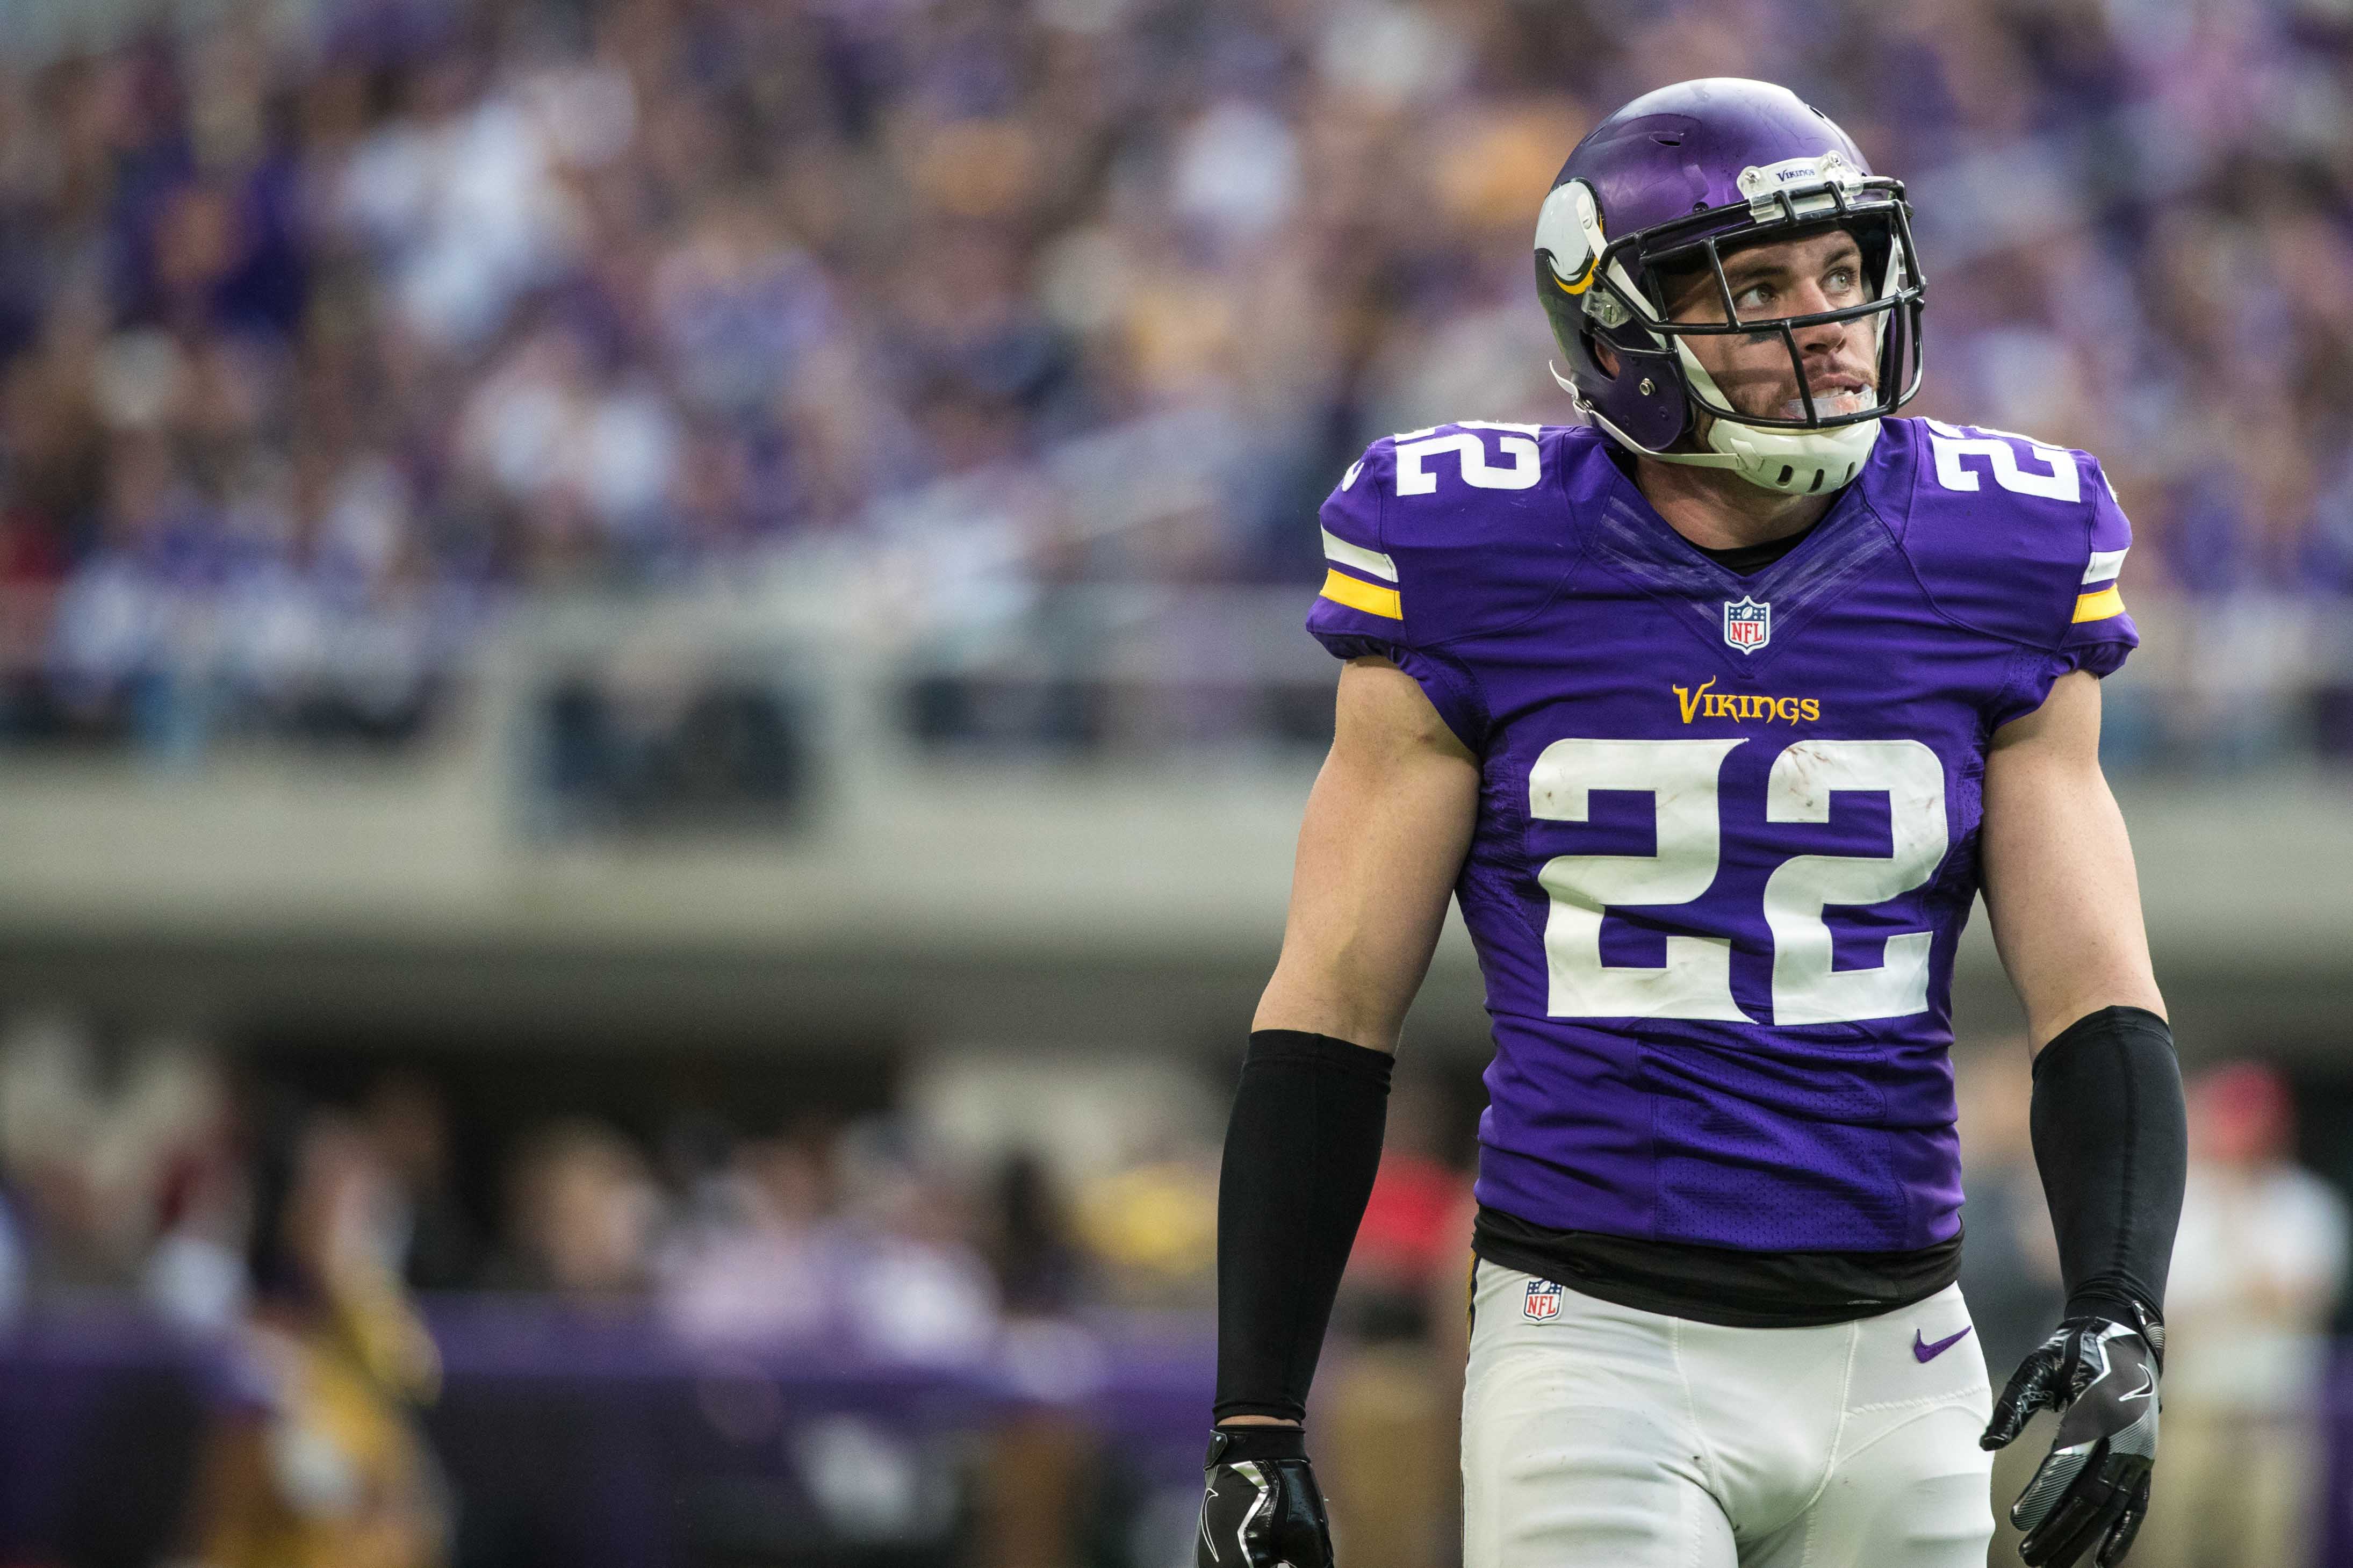 Vikings safety Harrison Smith to miss Jaguars game